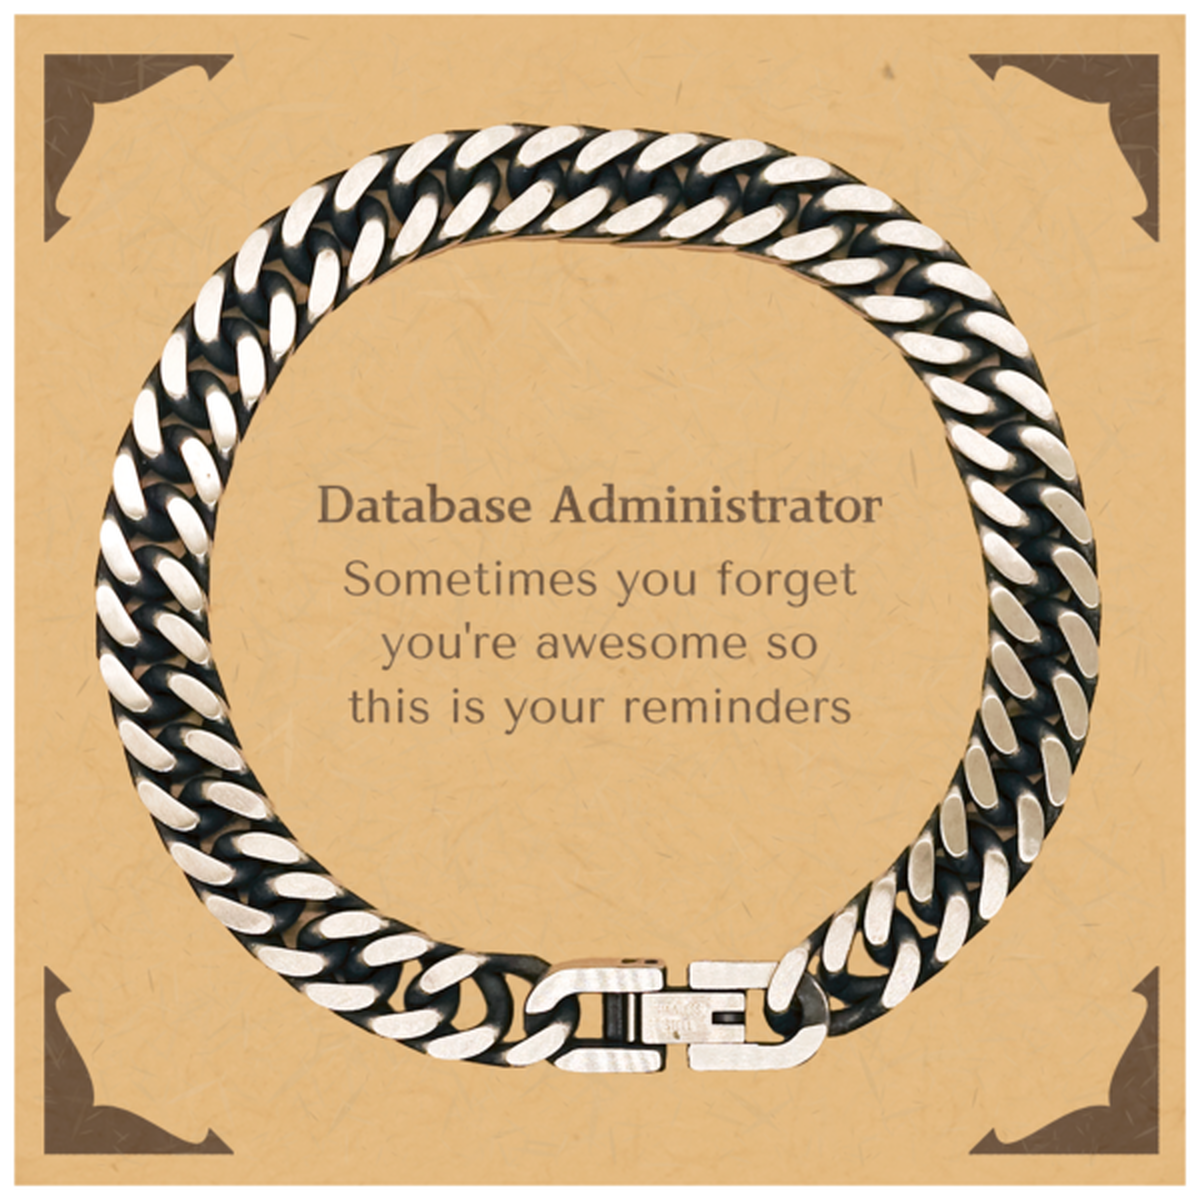 Sentimental Database Administrator Cuban Link Chain Bracelet, Database Administrator Sometimes you forget you're awesome so this is your reminders, Graduation Christmas Birthday Gifts for Database Administrator, Men, Women, Coworkers